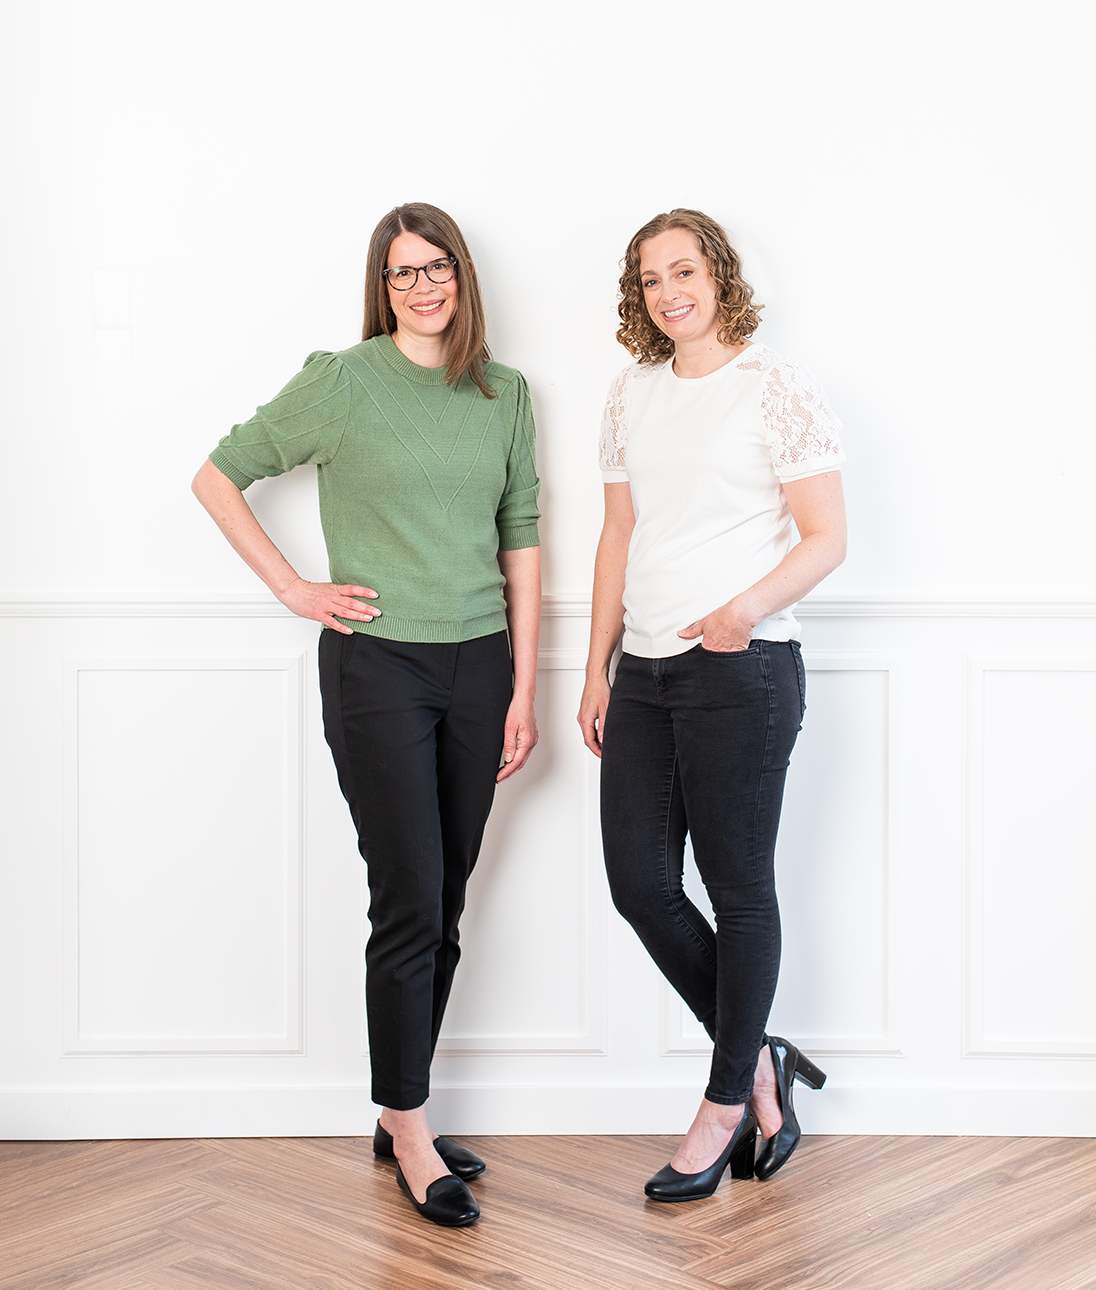 Kelley and Andrea of Inkling Design standing against a white wall